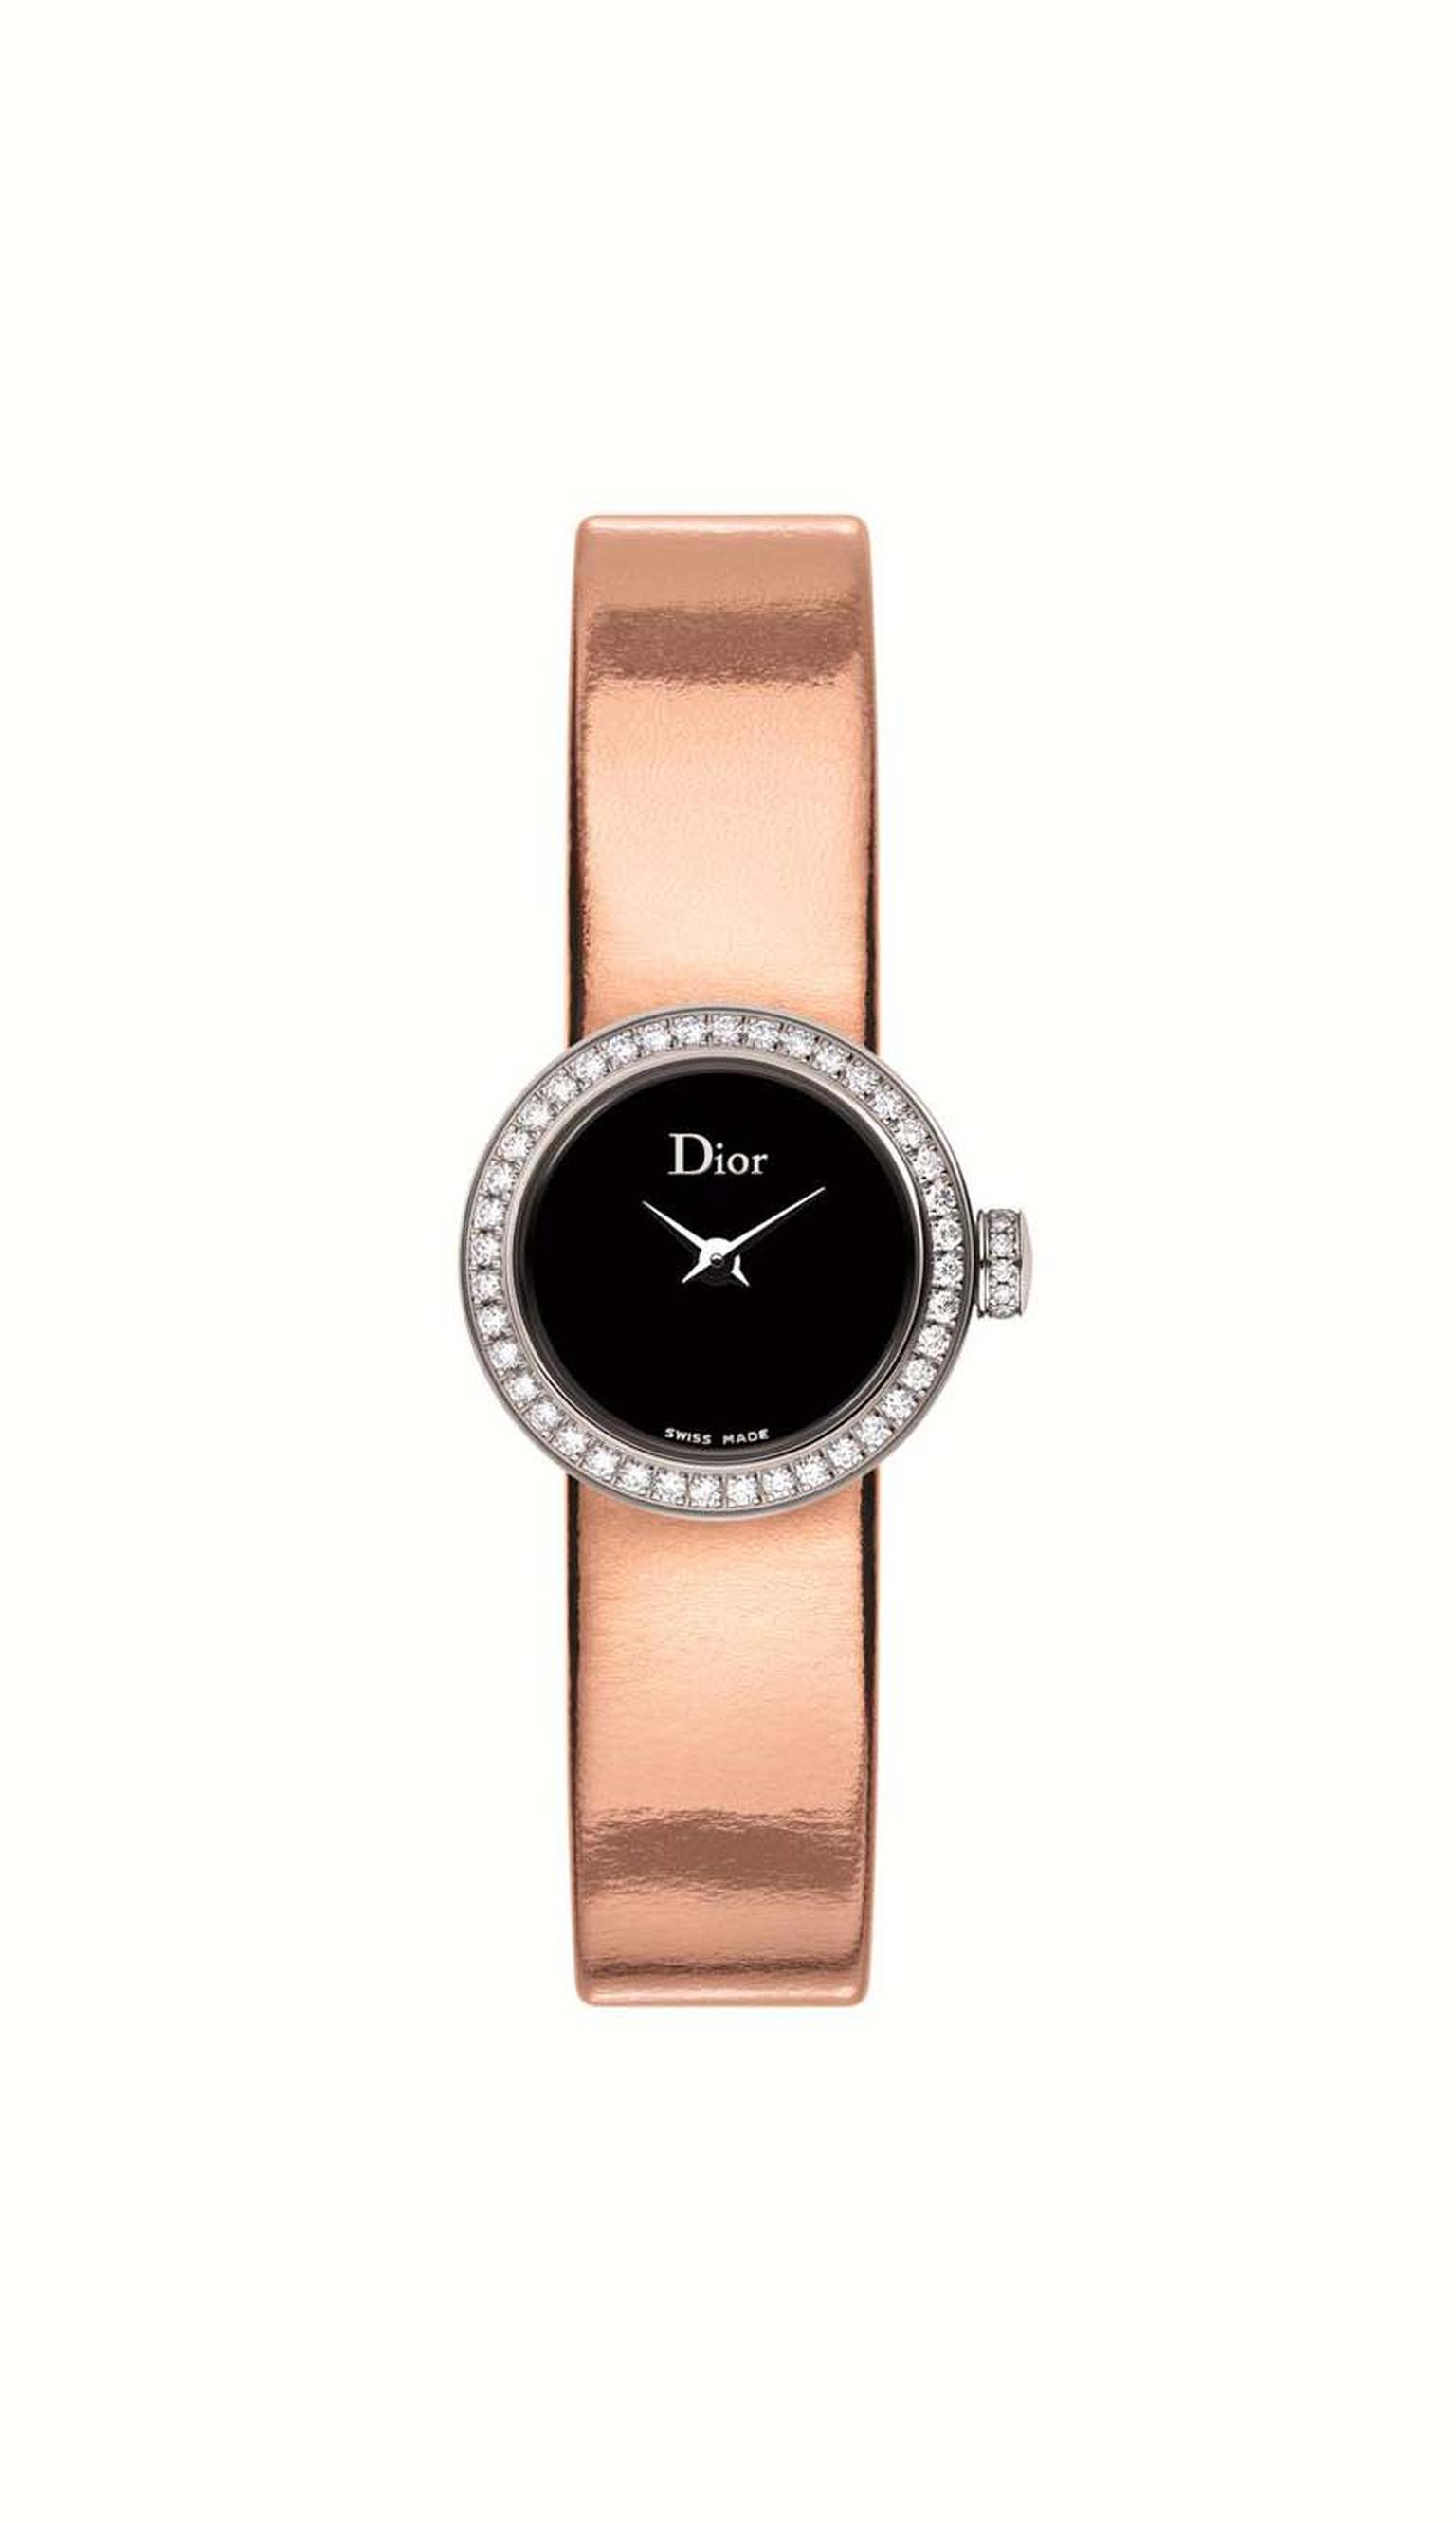 This La Mini D de Dior watch measures just 19mm across. With an inky black mother-of-pearl dial set alight with diamonds on the bezel and crown, a sumptuous metallic leather strap adds the finishing touch (£2,900).